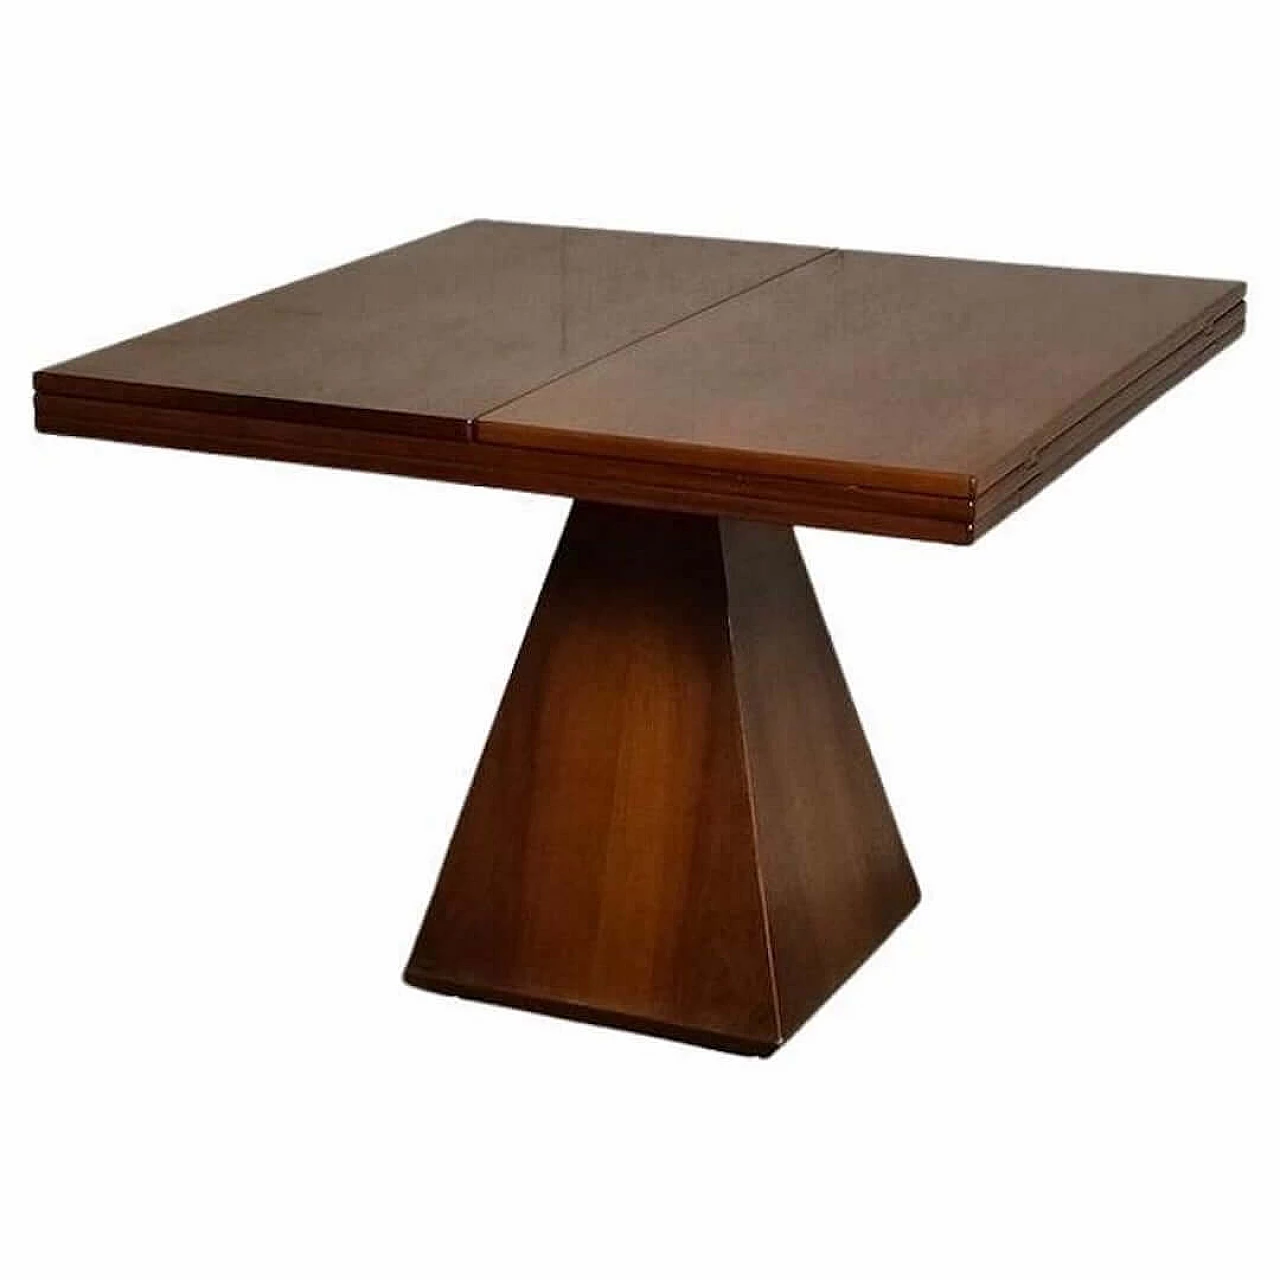 Extending table model Chelsea by Vittorio Introini for Saporiti, 1960s 1